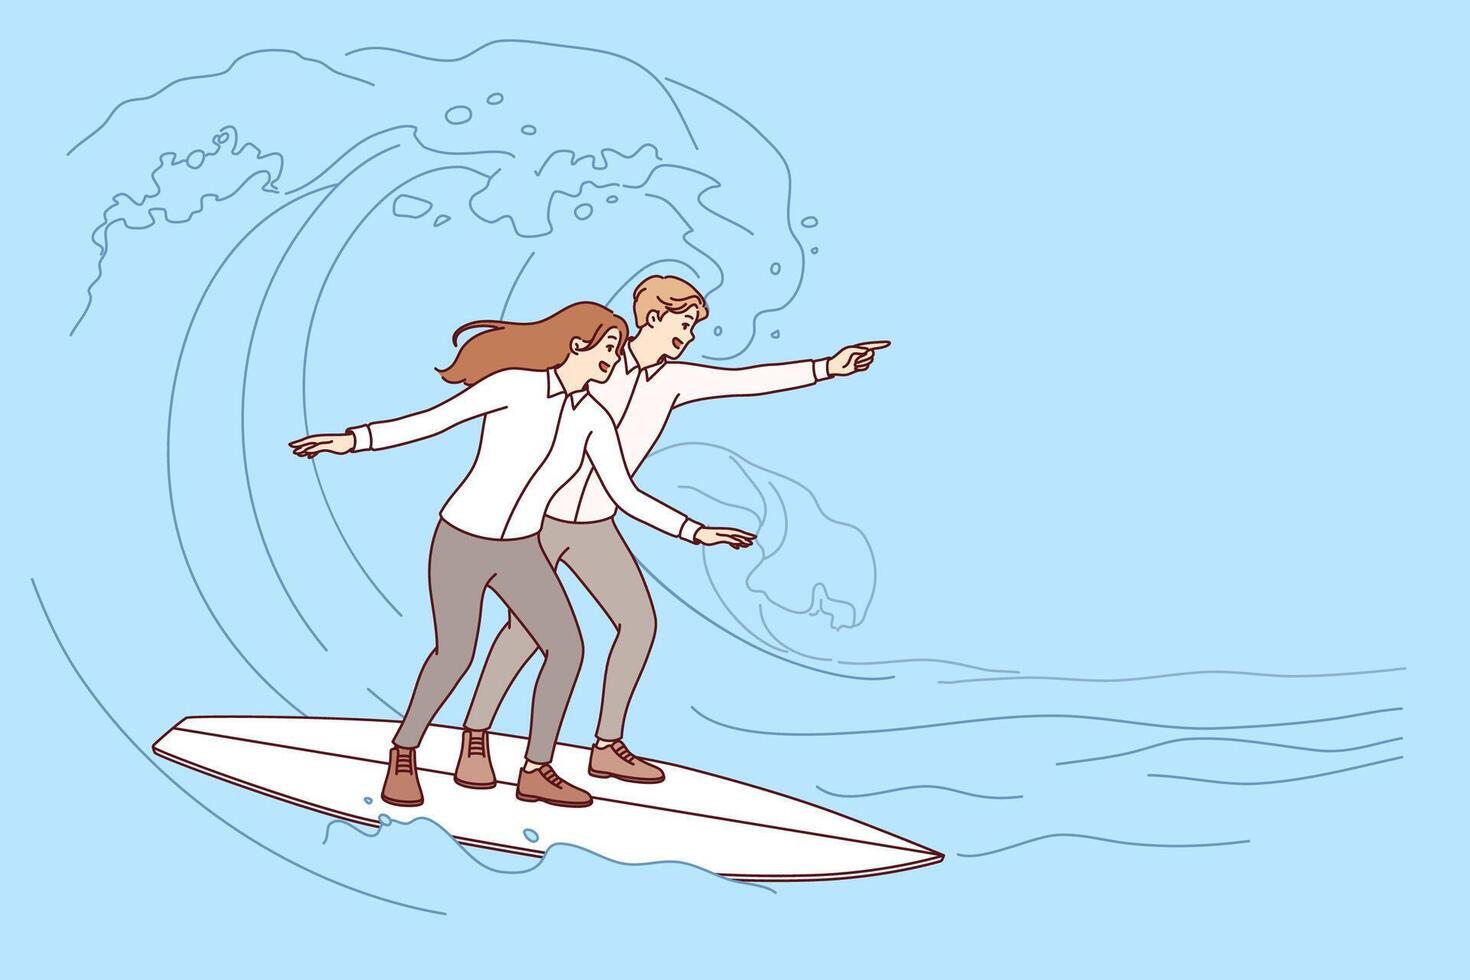 Business partners take risks to achieve success by riding surfboards on sea waves vector